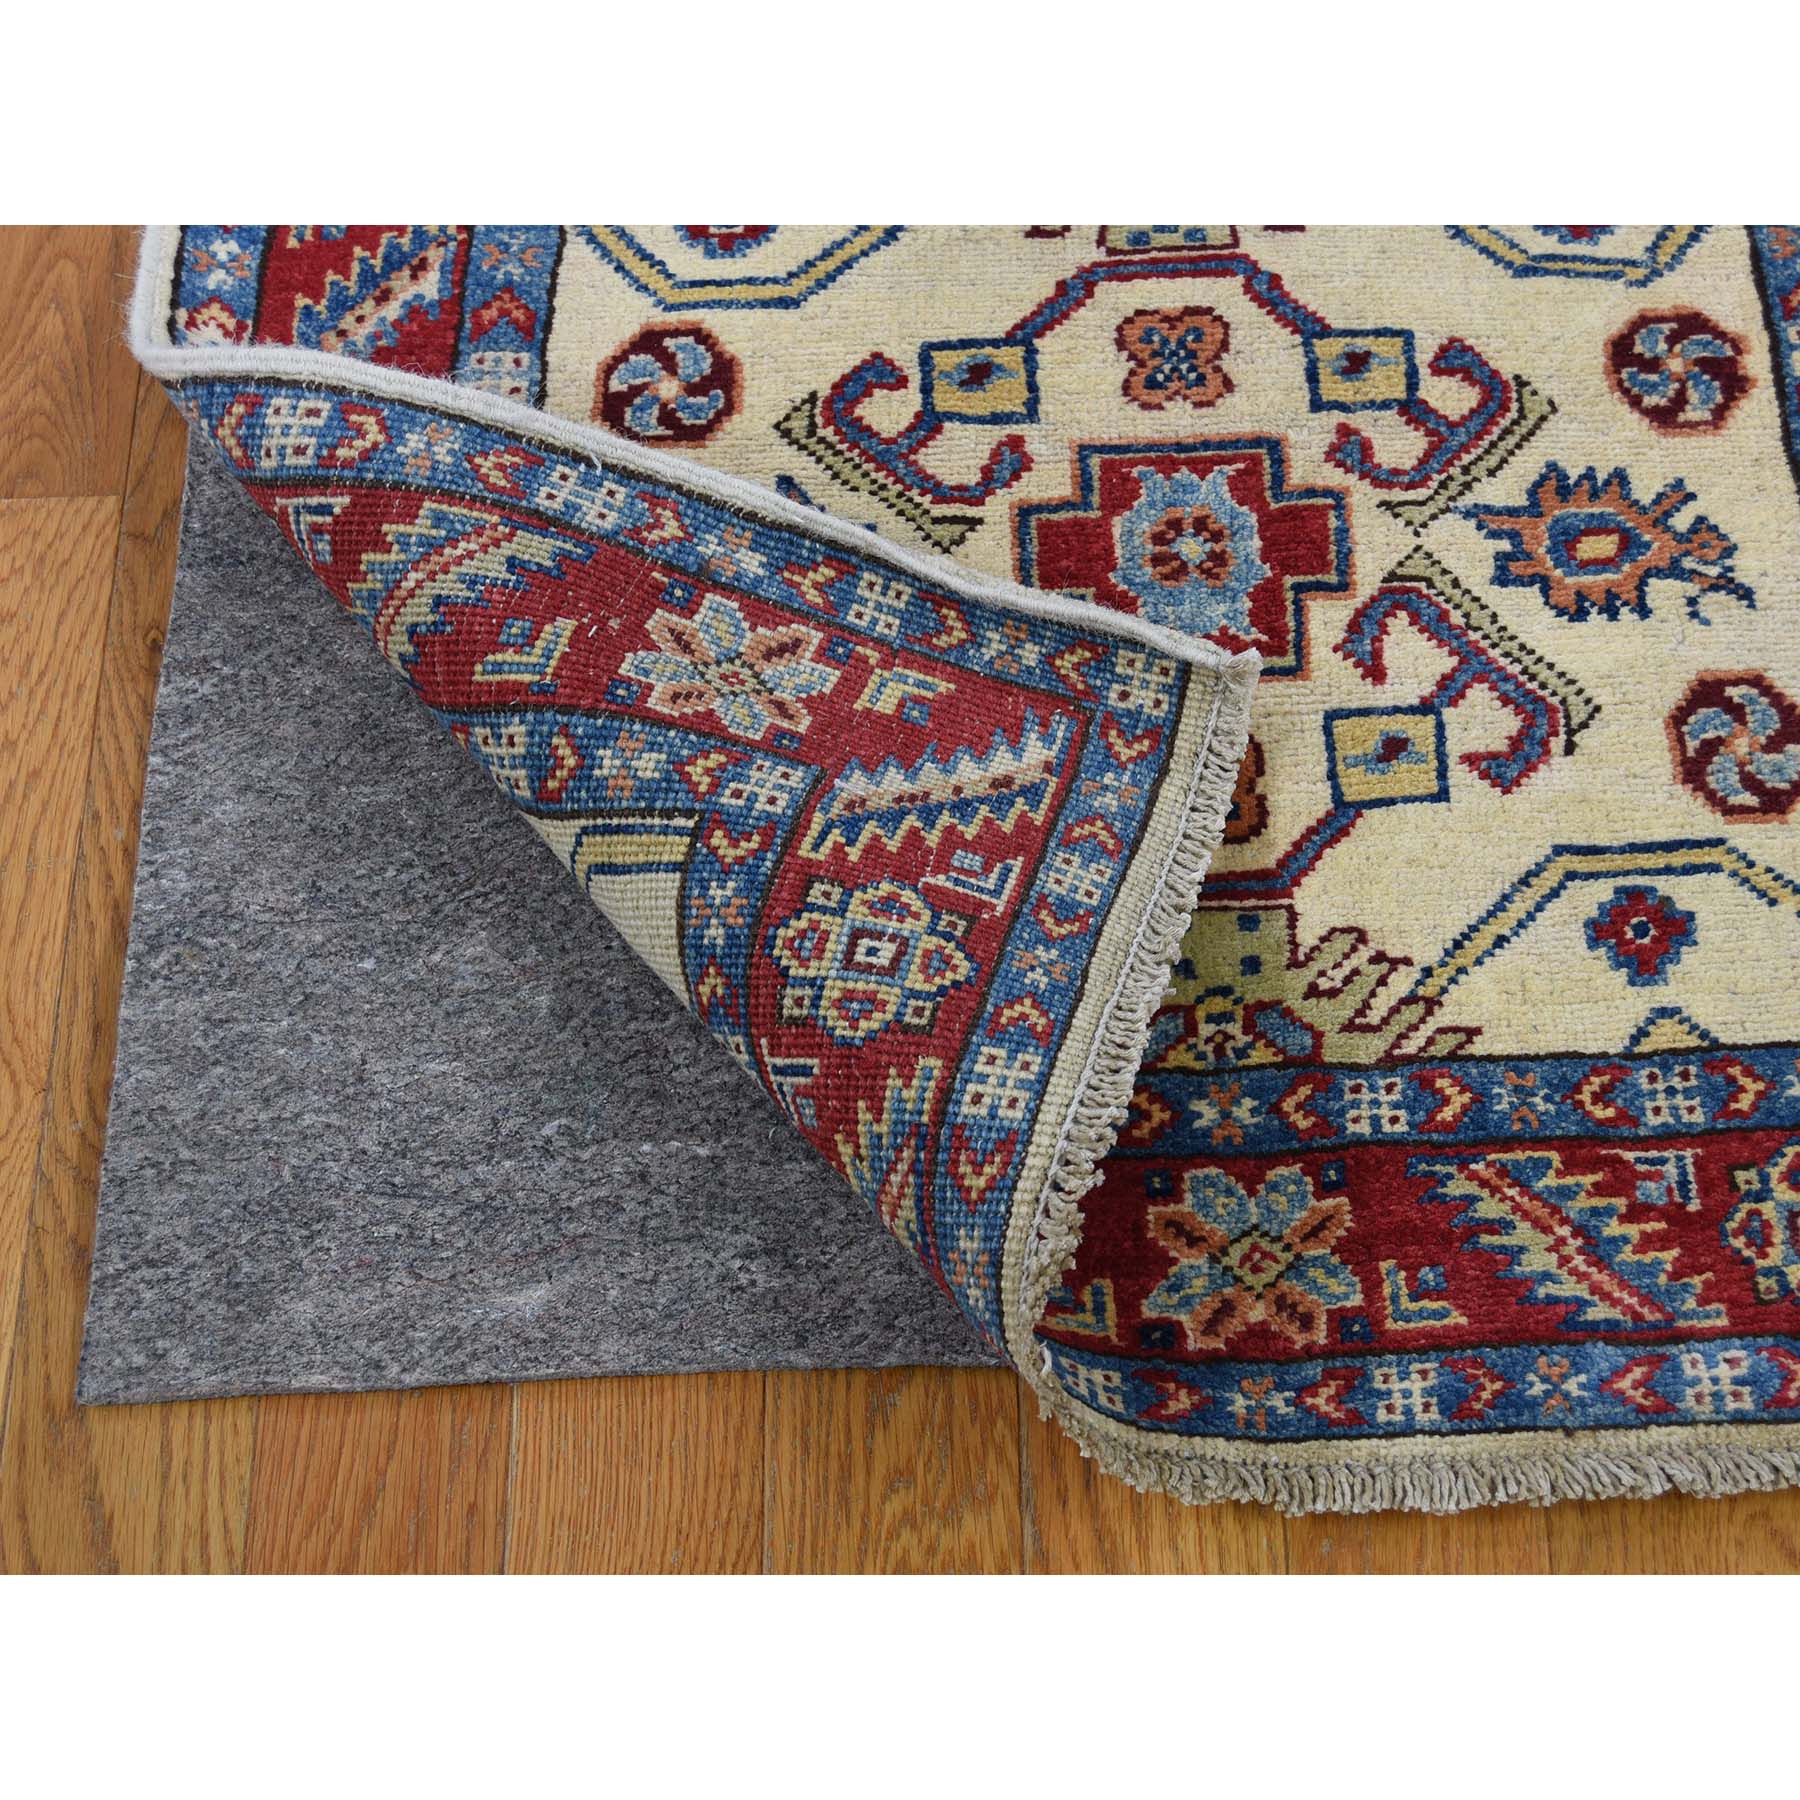 2-8 x9-4  Special Kazak Pure Wool Hand-Knotted Runner Oriental Rug 